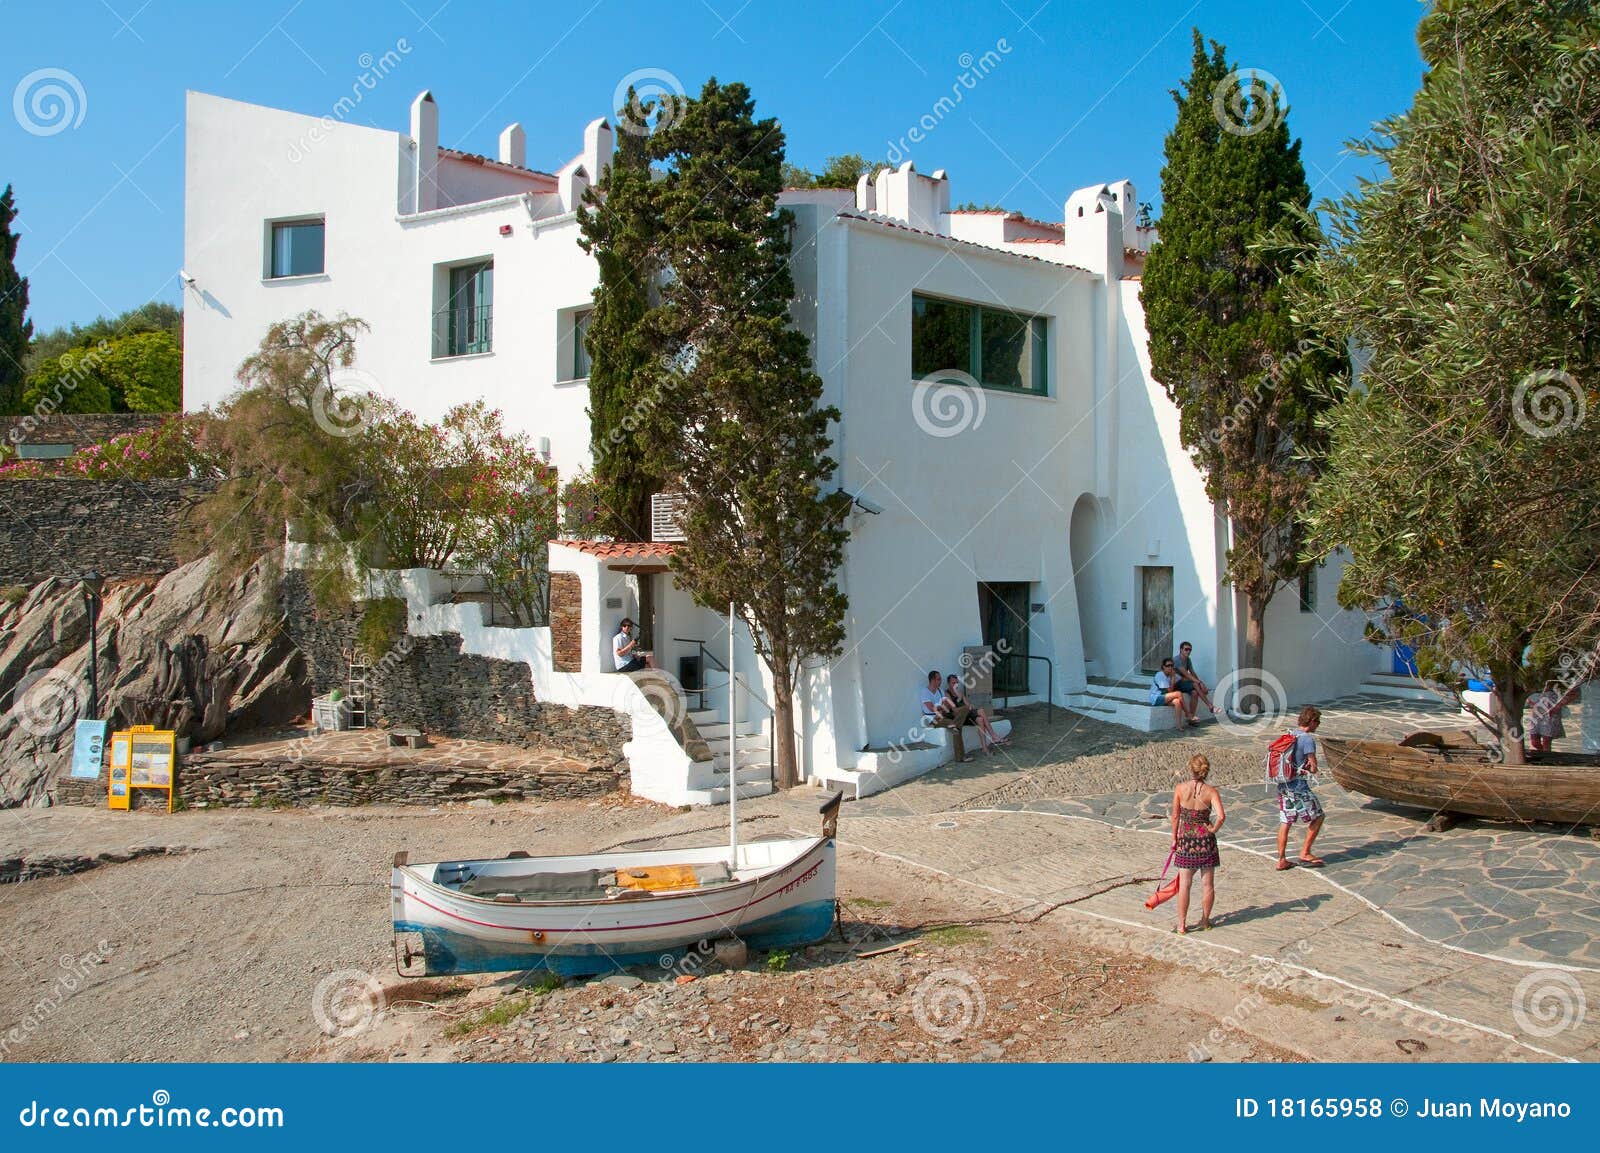 Dali S House In Portlligat Cadaques Spain Editorial Stock Photo Image Of Costa Entrance